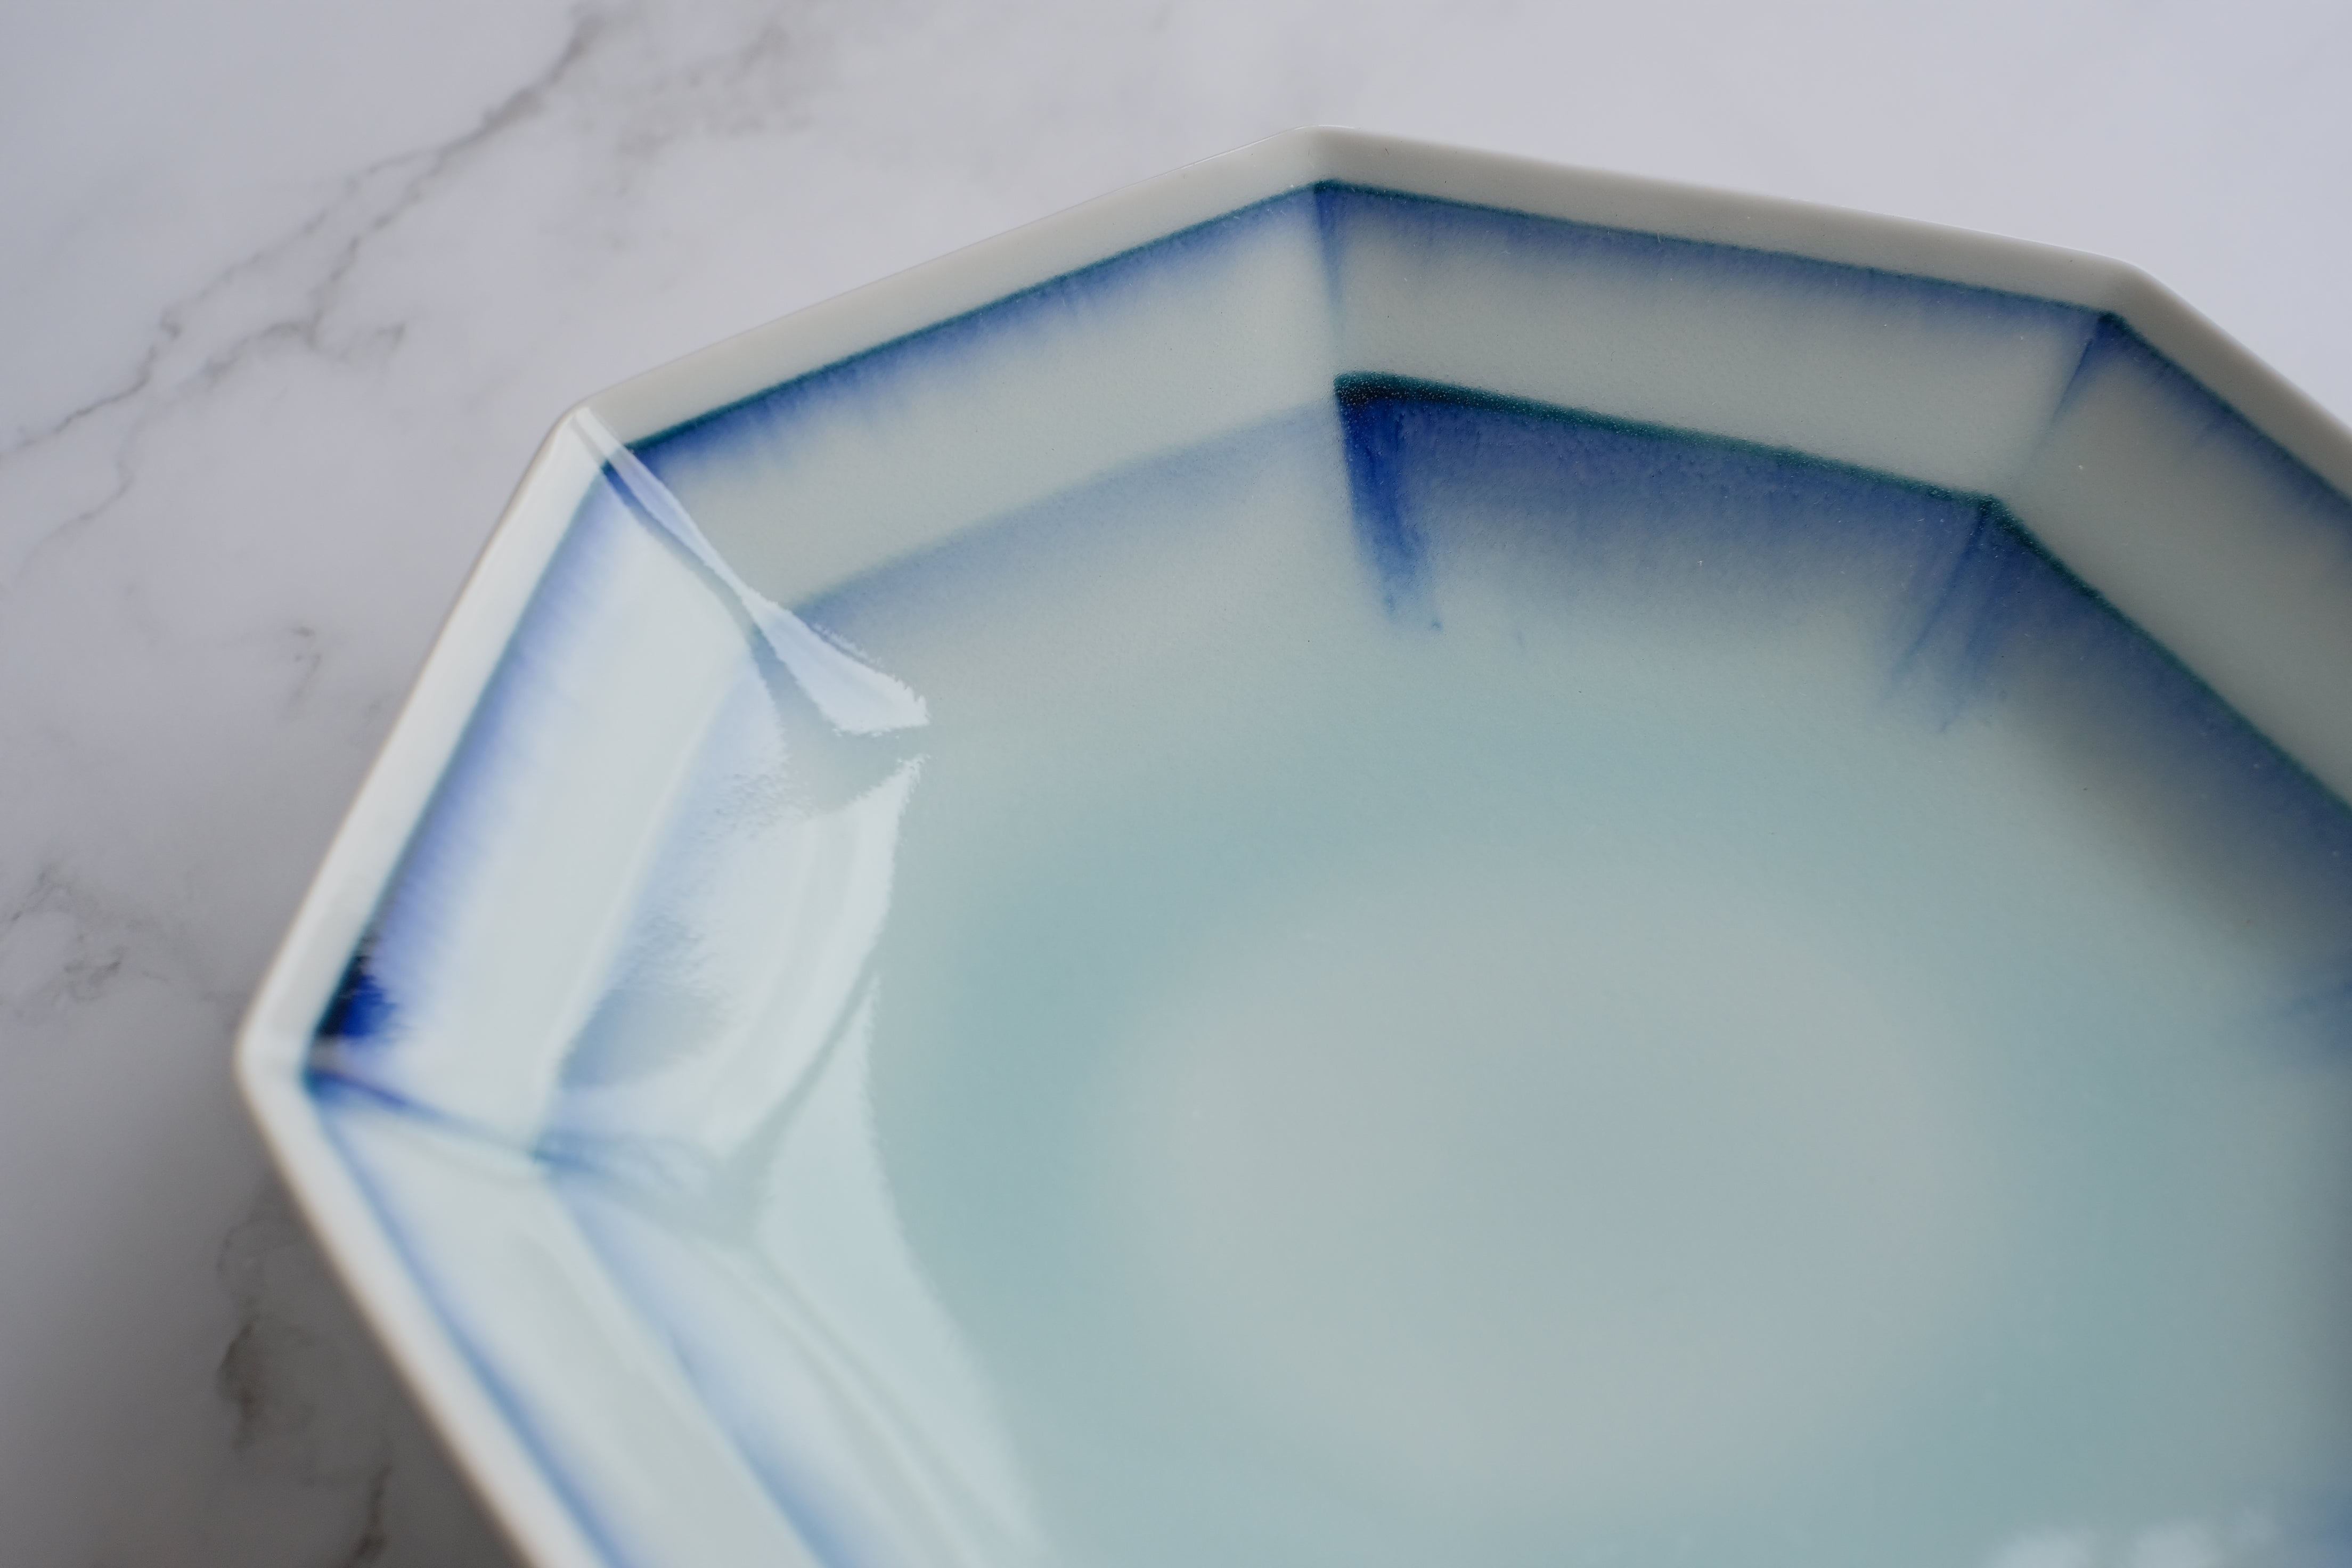 Lake Blue Ombre Octagon Serving Plate